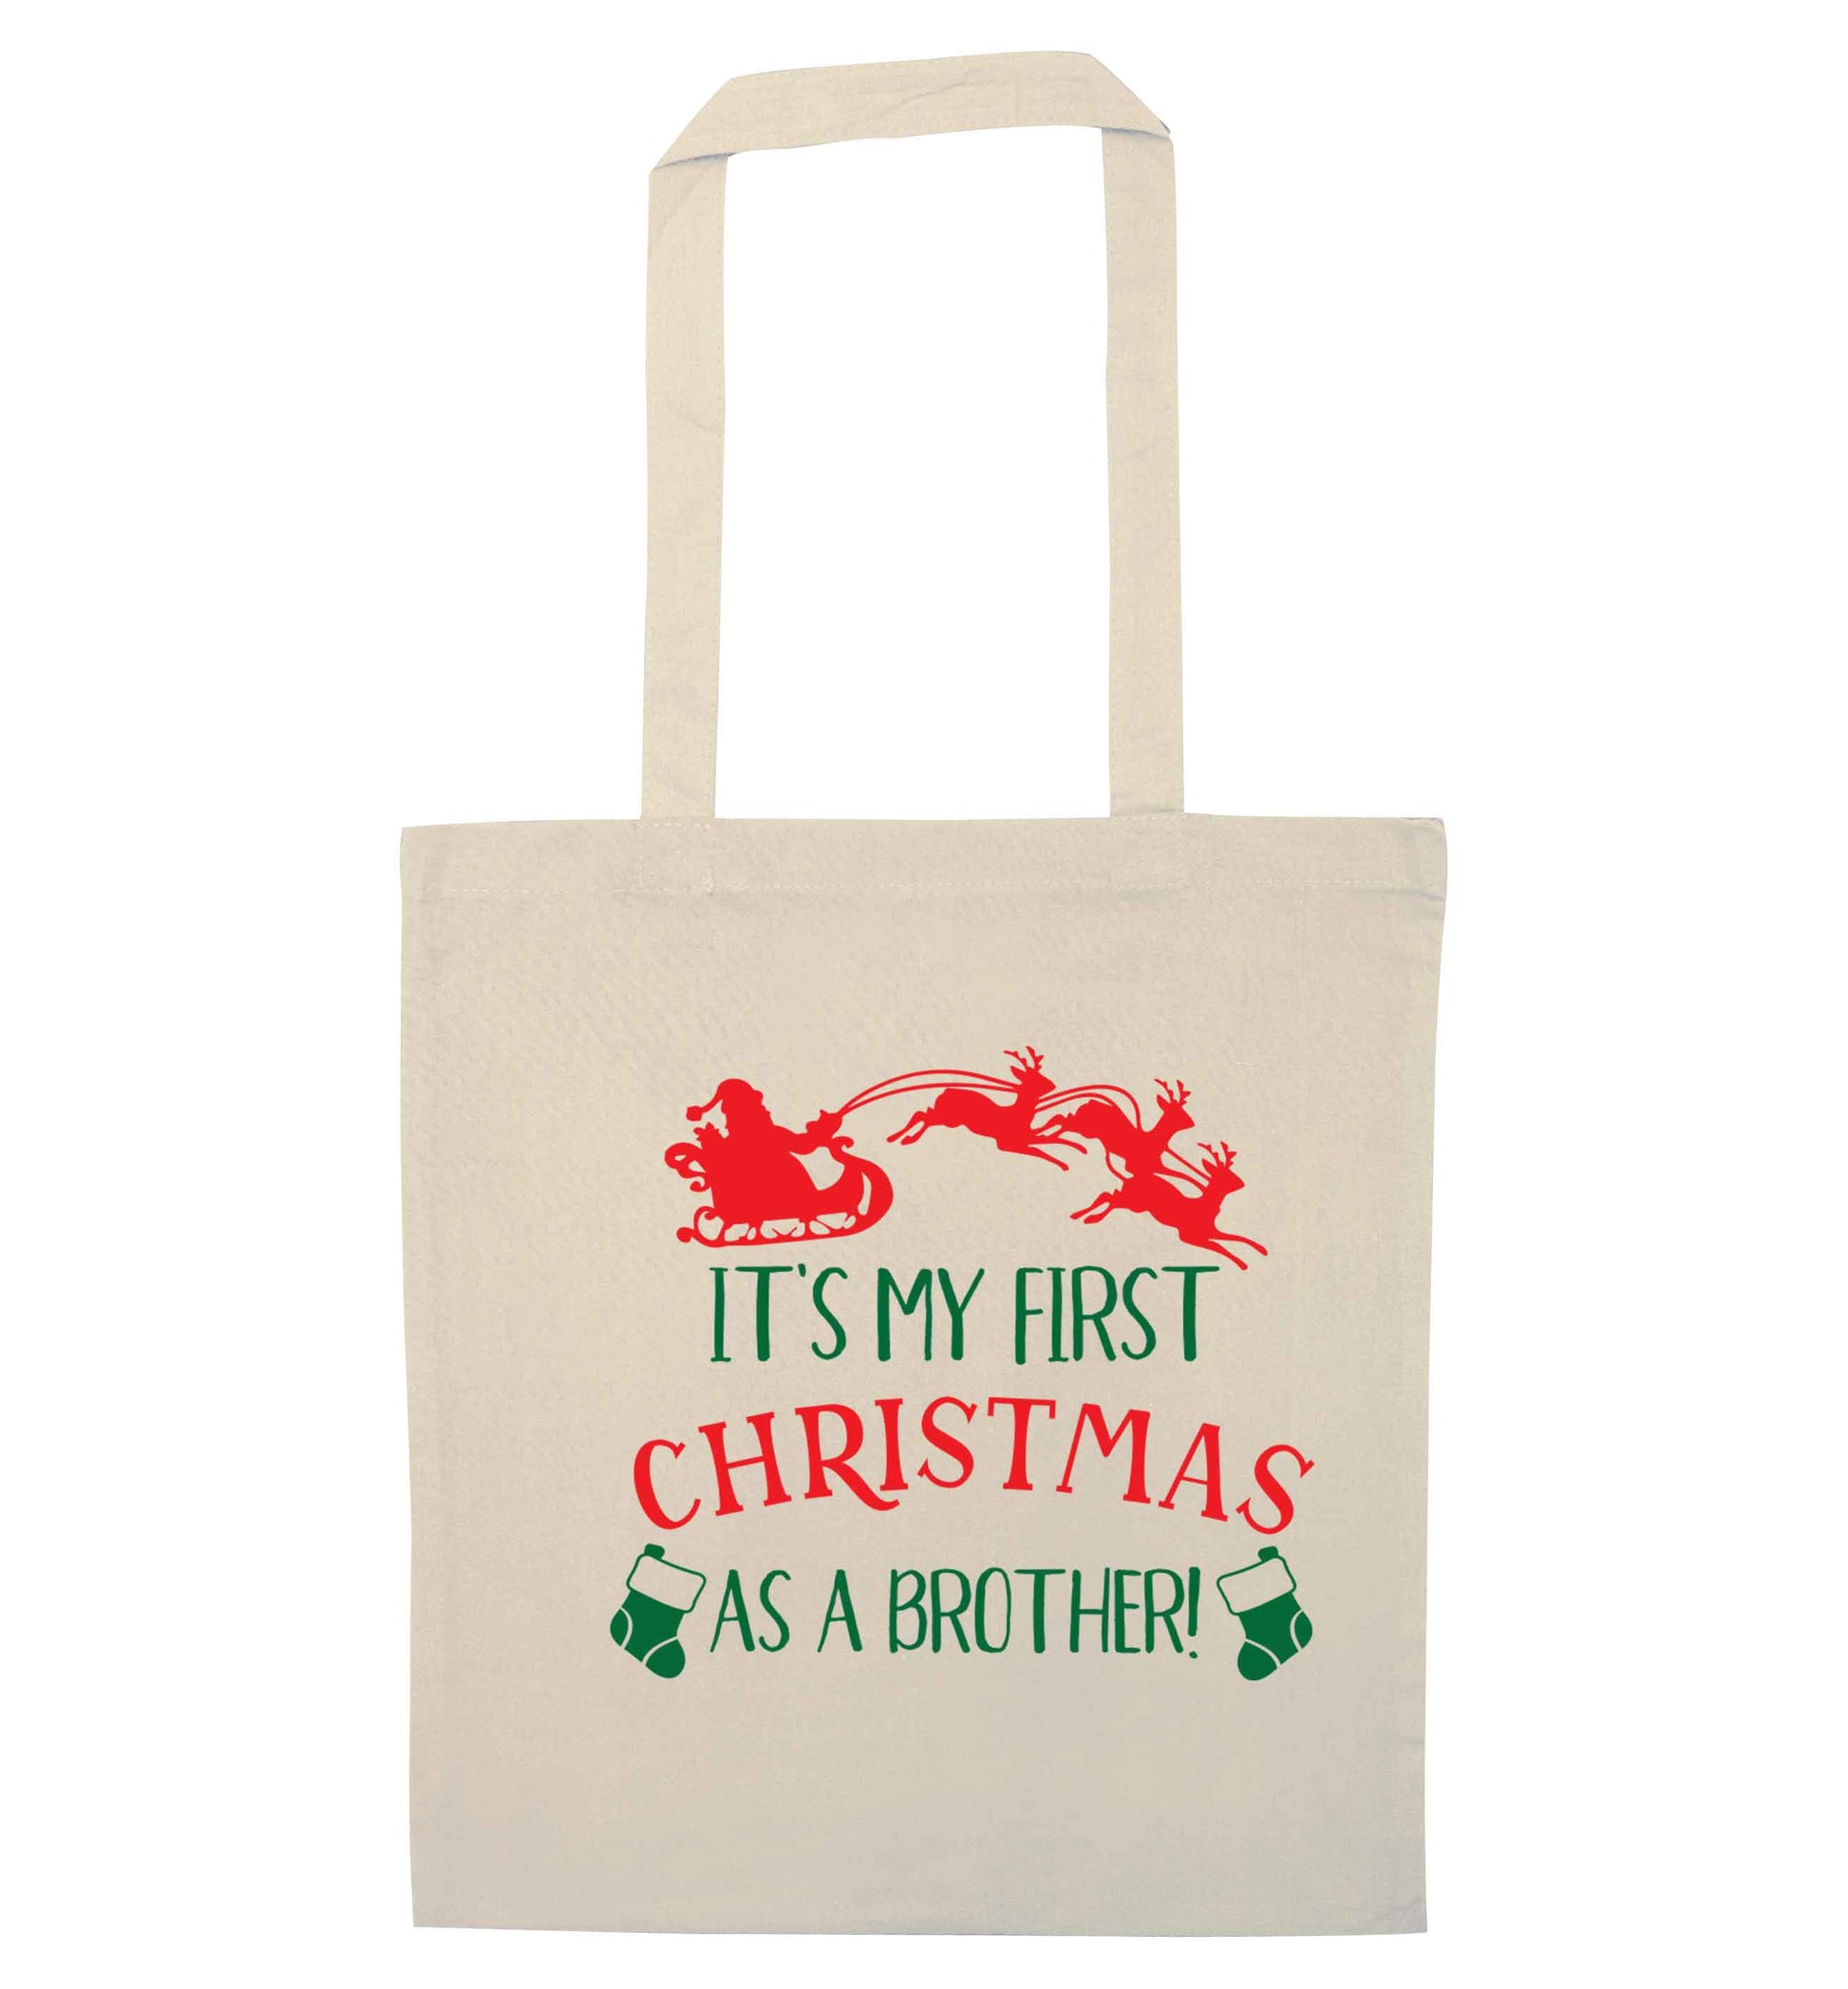 It's my first Christmas as a brother! natural tote bag